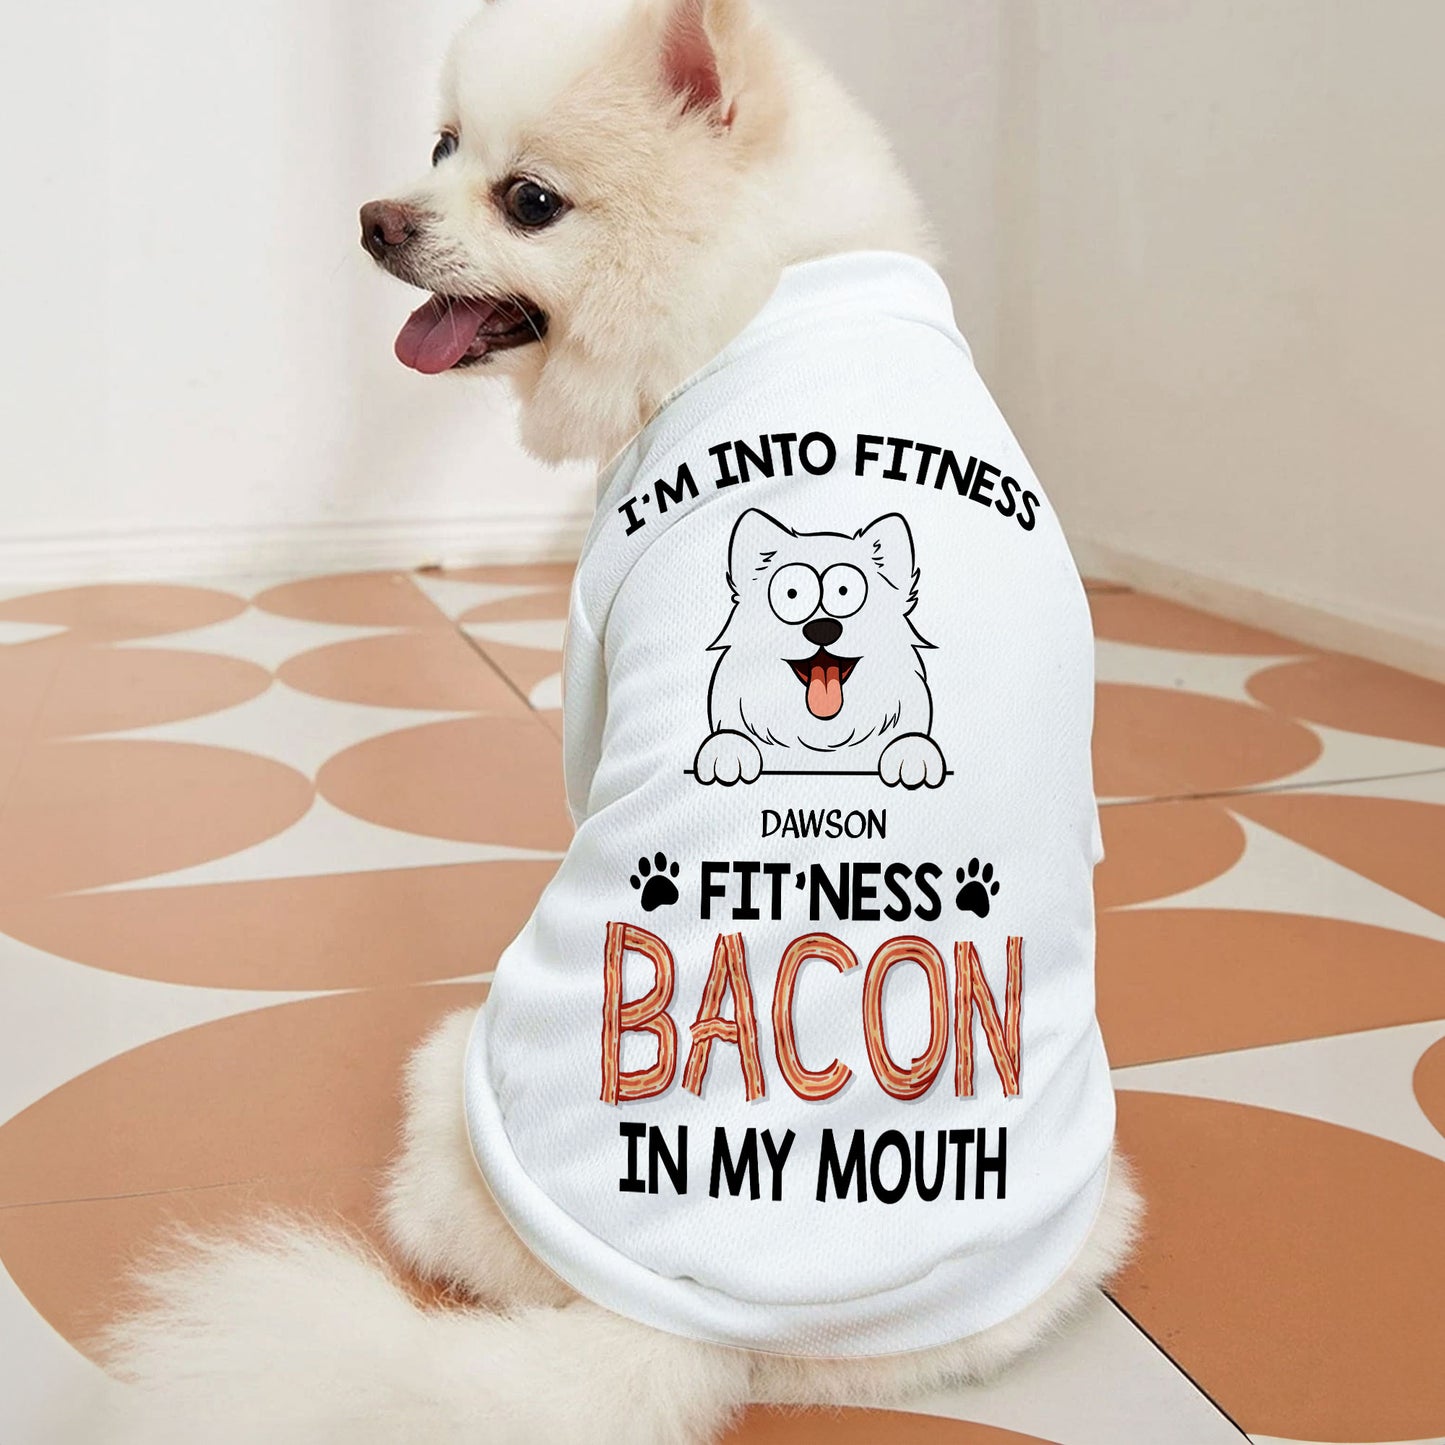 Fit'ness Bacon In My Mouth - Personalized Pet Shirt